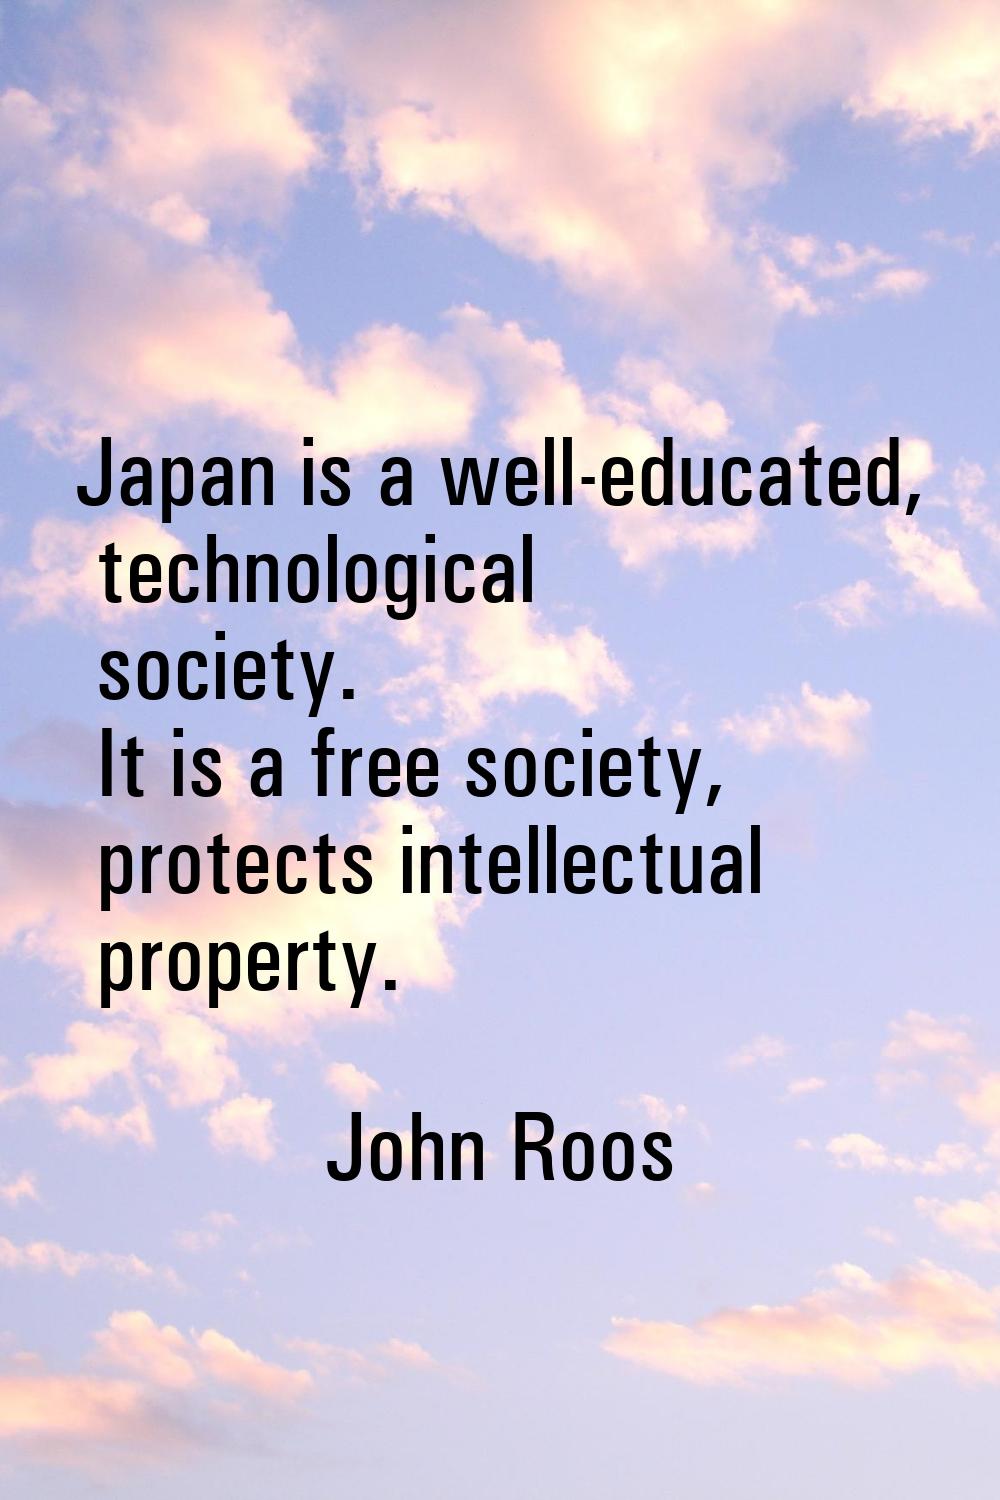 Japan is a well-educated, technological society. It is a free society, protects intellectual proper